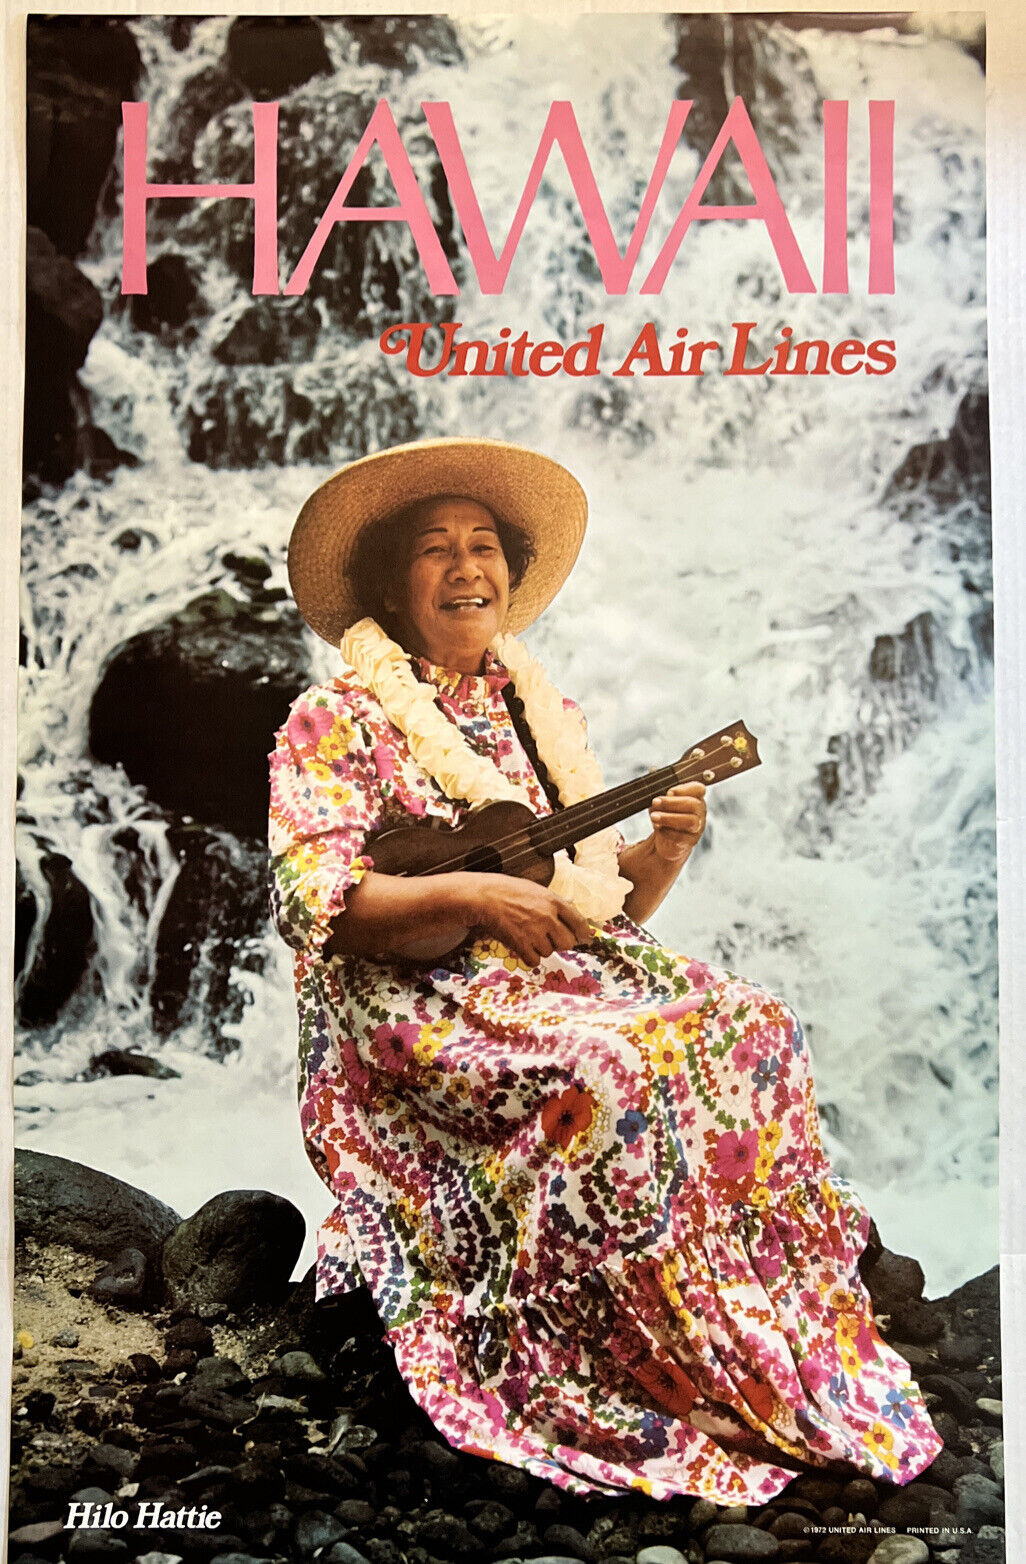 Vintage 1972 Hawaii United Airlines Promotional Travel Poster Mint Hilo Hattie